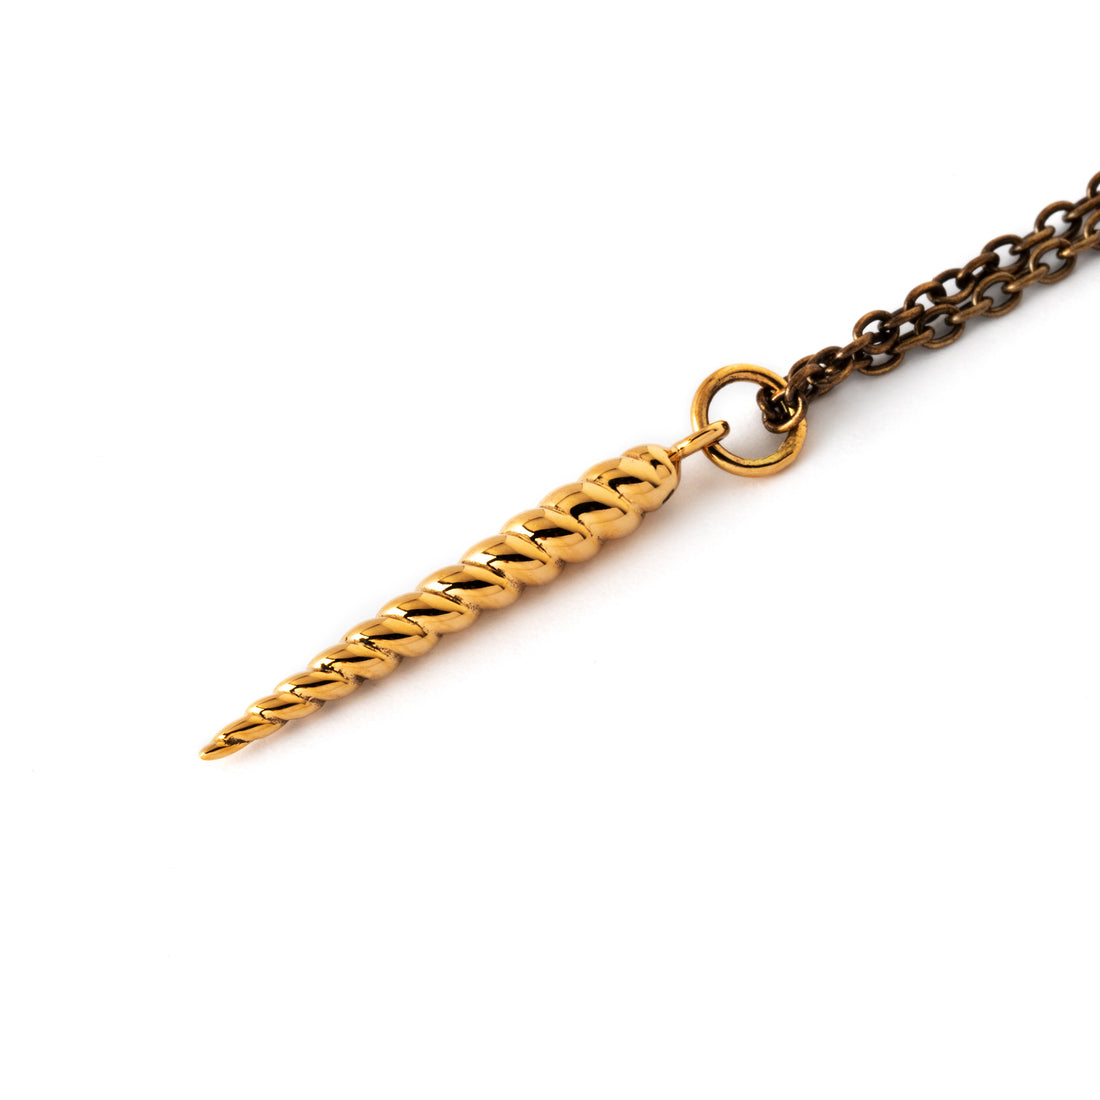 spiralling cone bronze pendant on a chain necklace